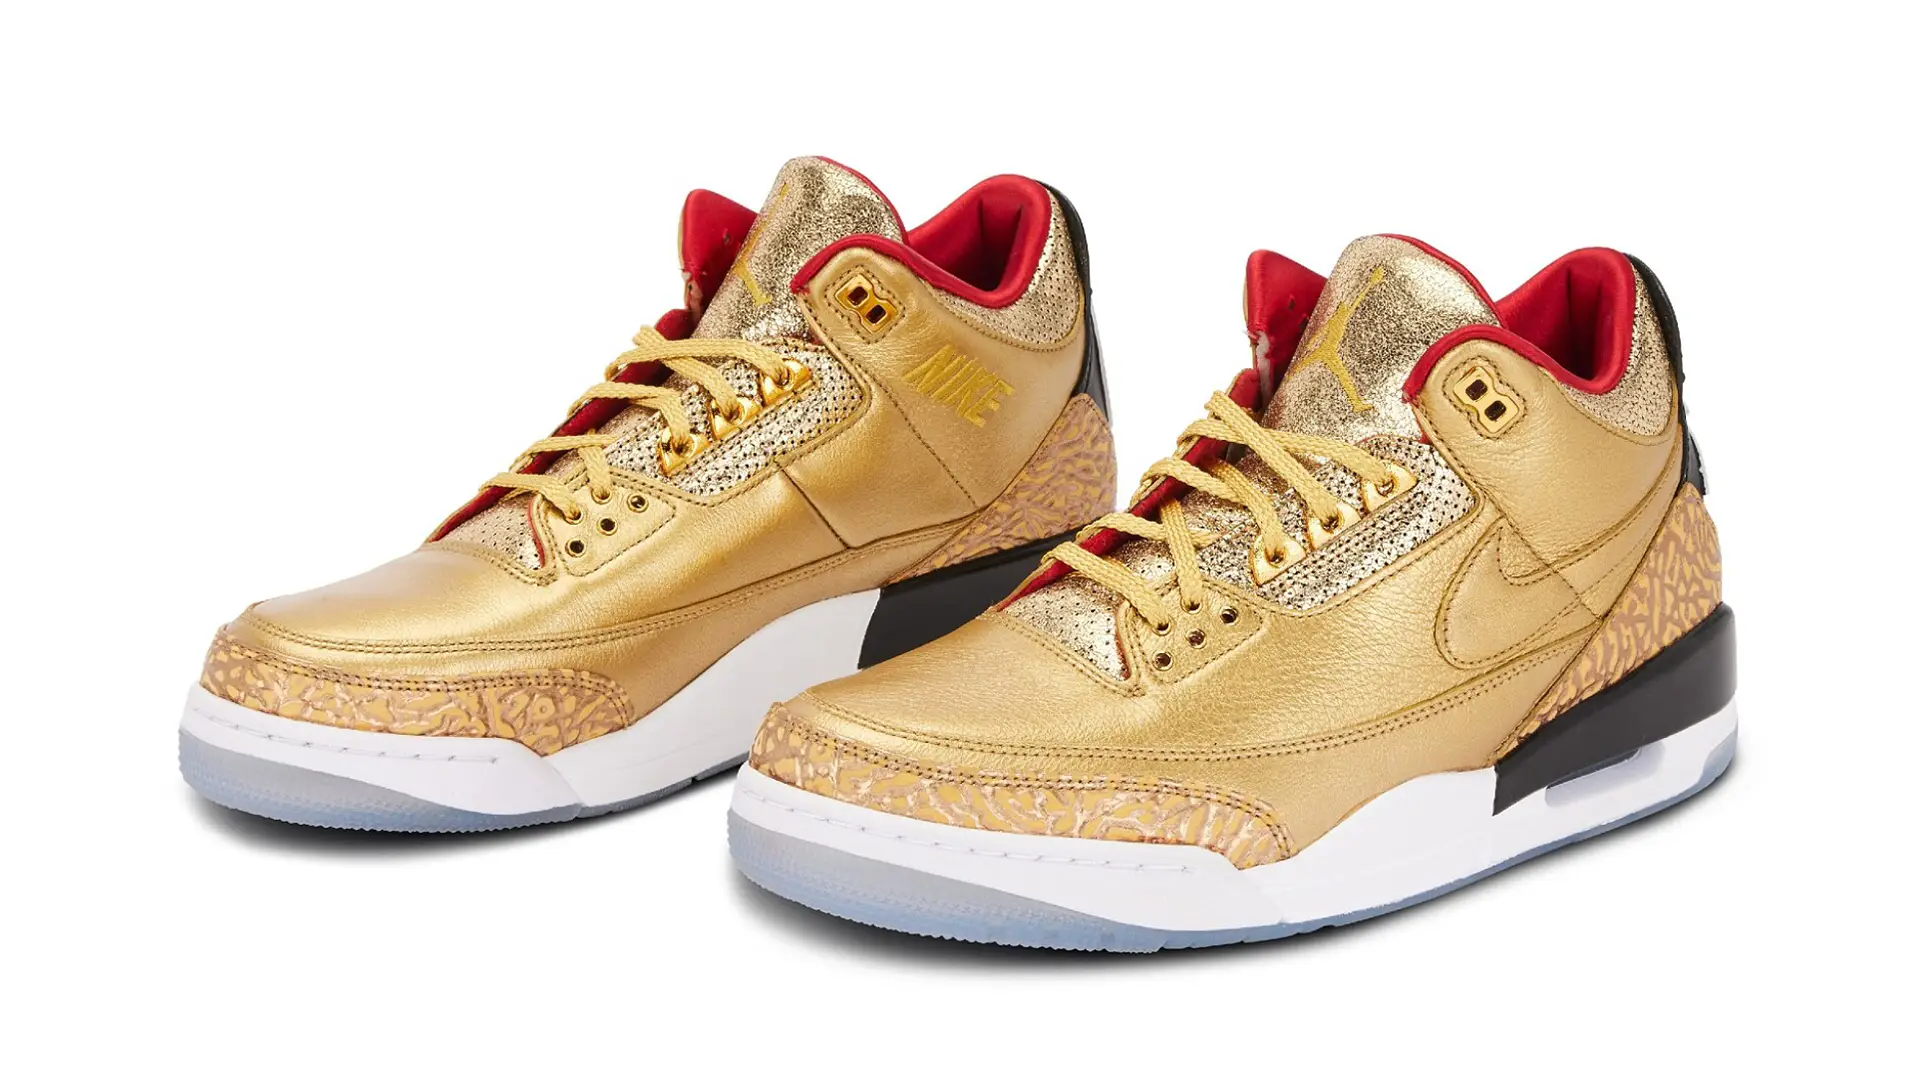 The 12 Most Expensive Jordans Ever Sold